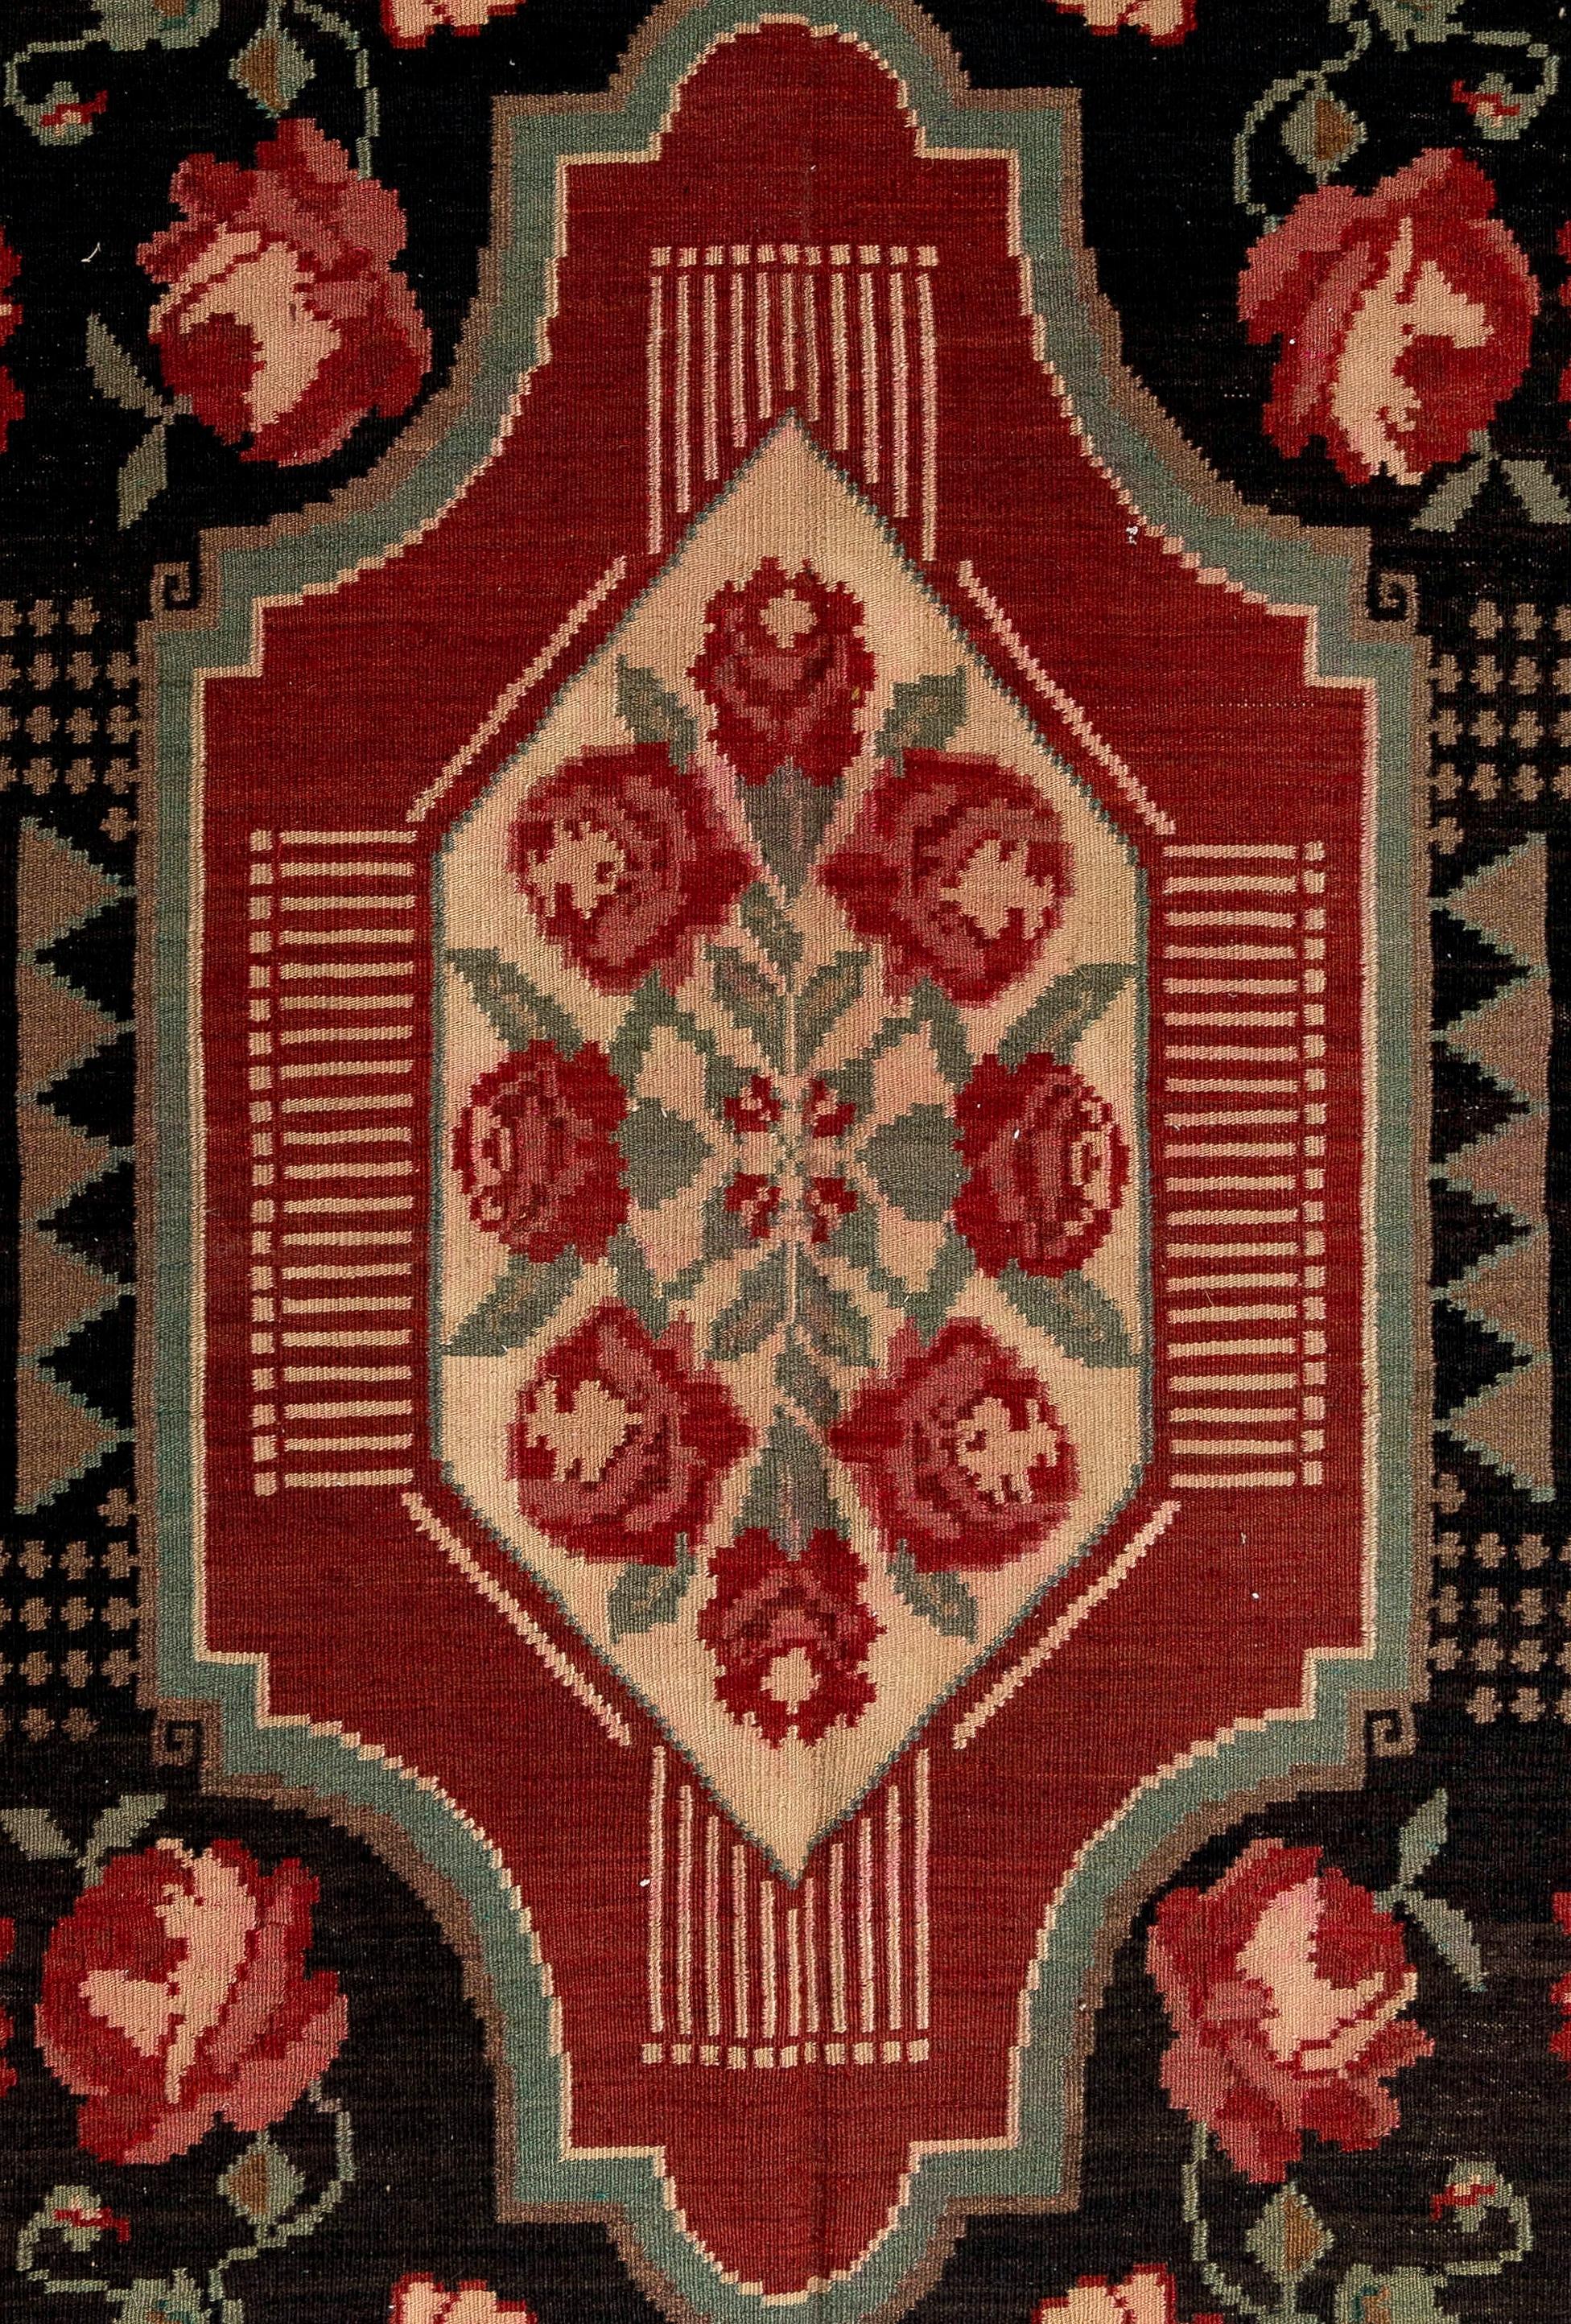 Hand-Woven 5.6x8.8 Ft Hand Woven Moldovan Kilim with Floral Design, Vintage Bessarabian Rug